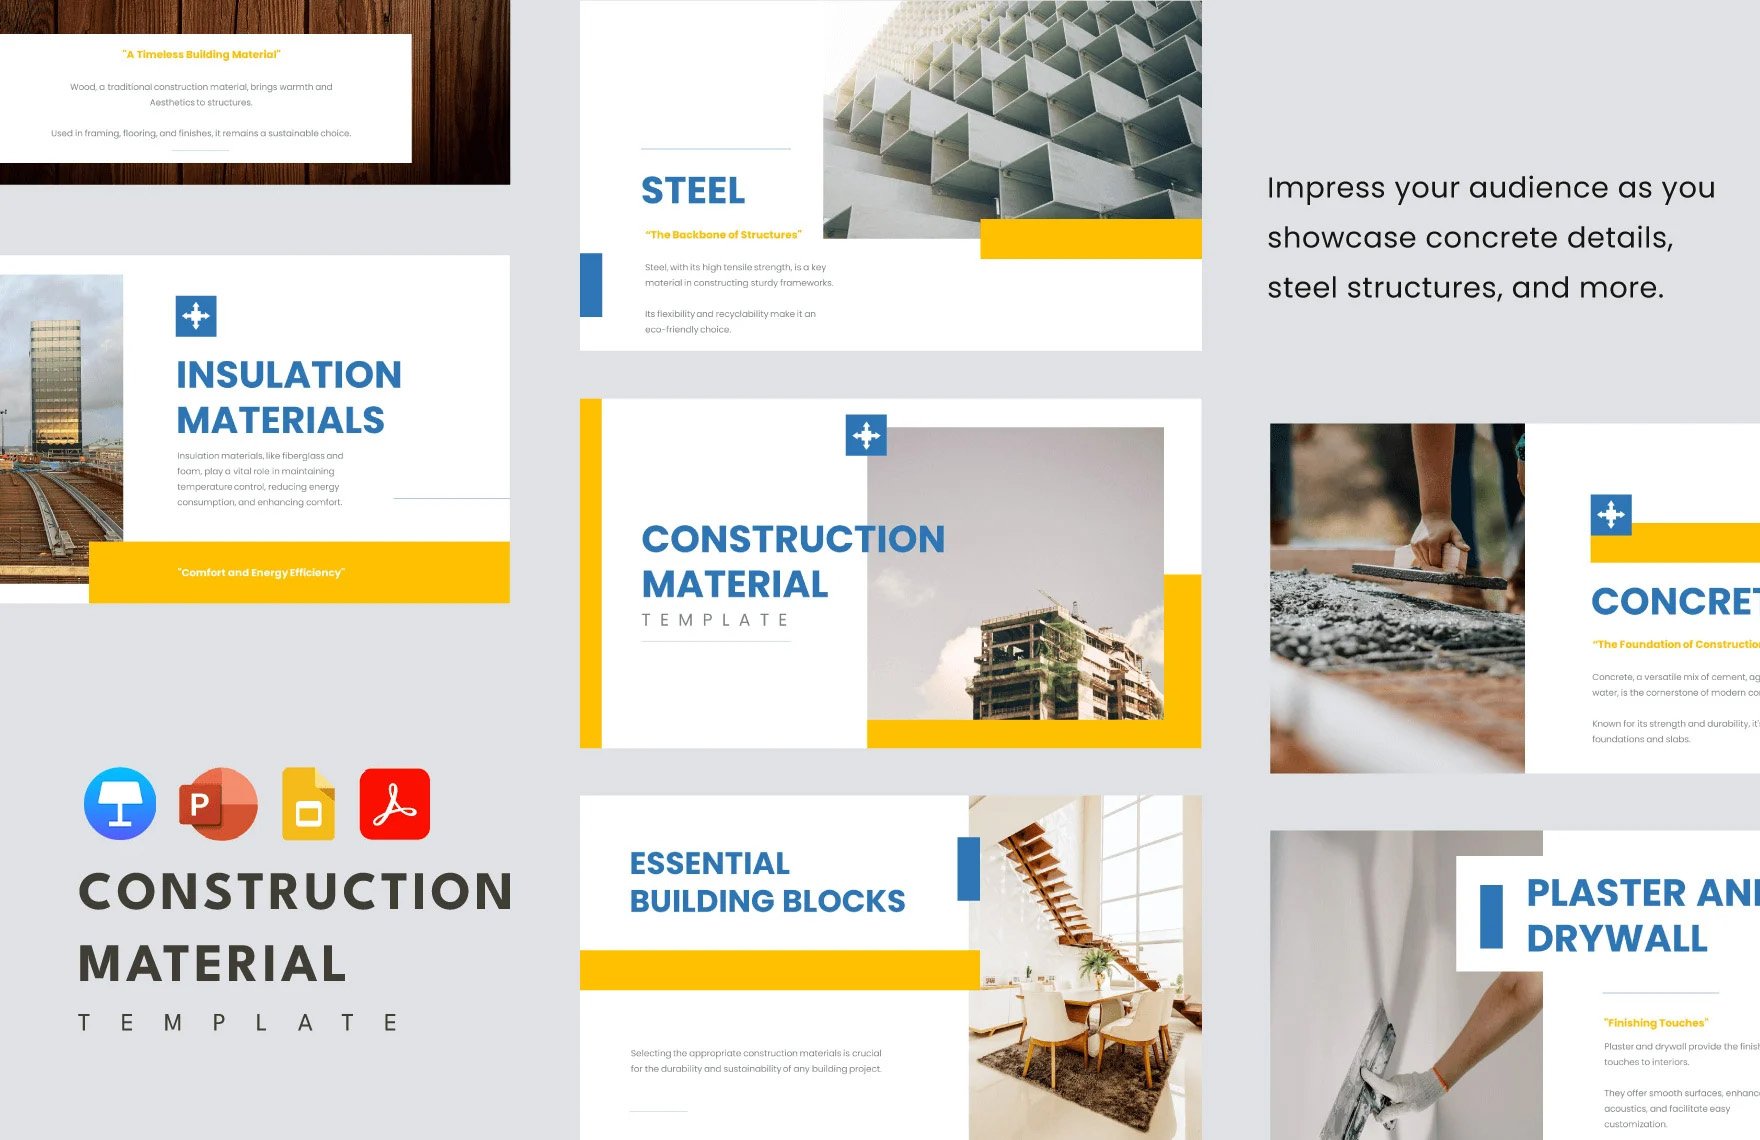 Construction Material Template